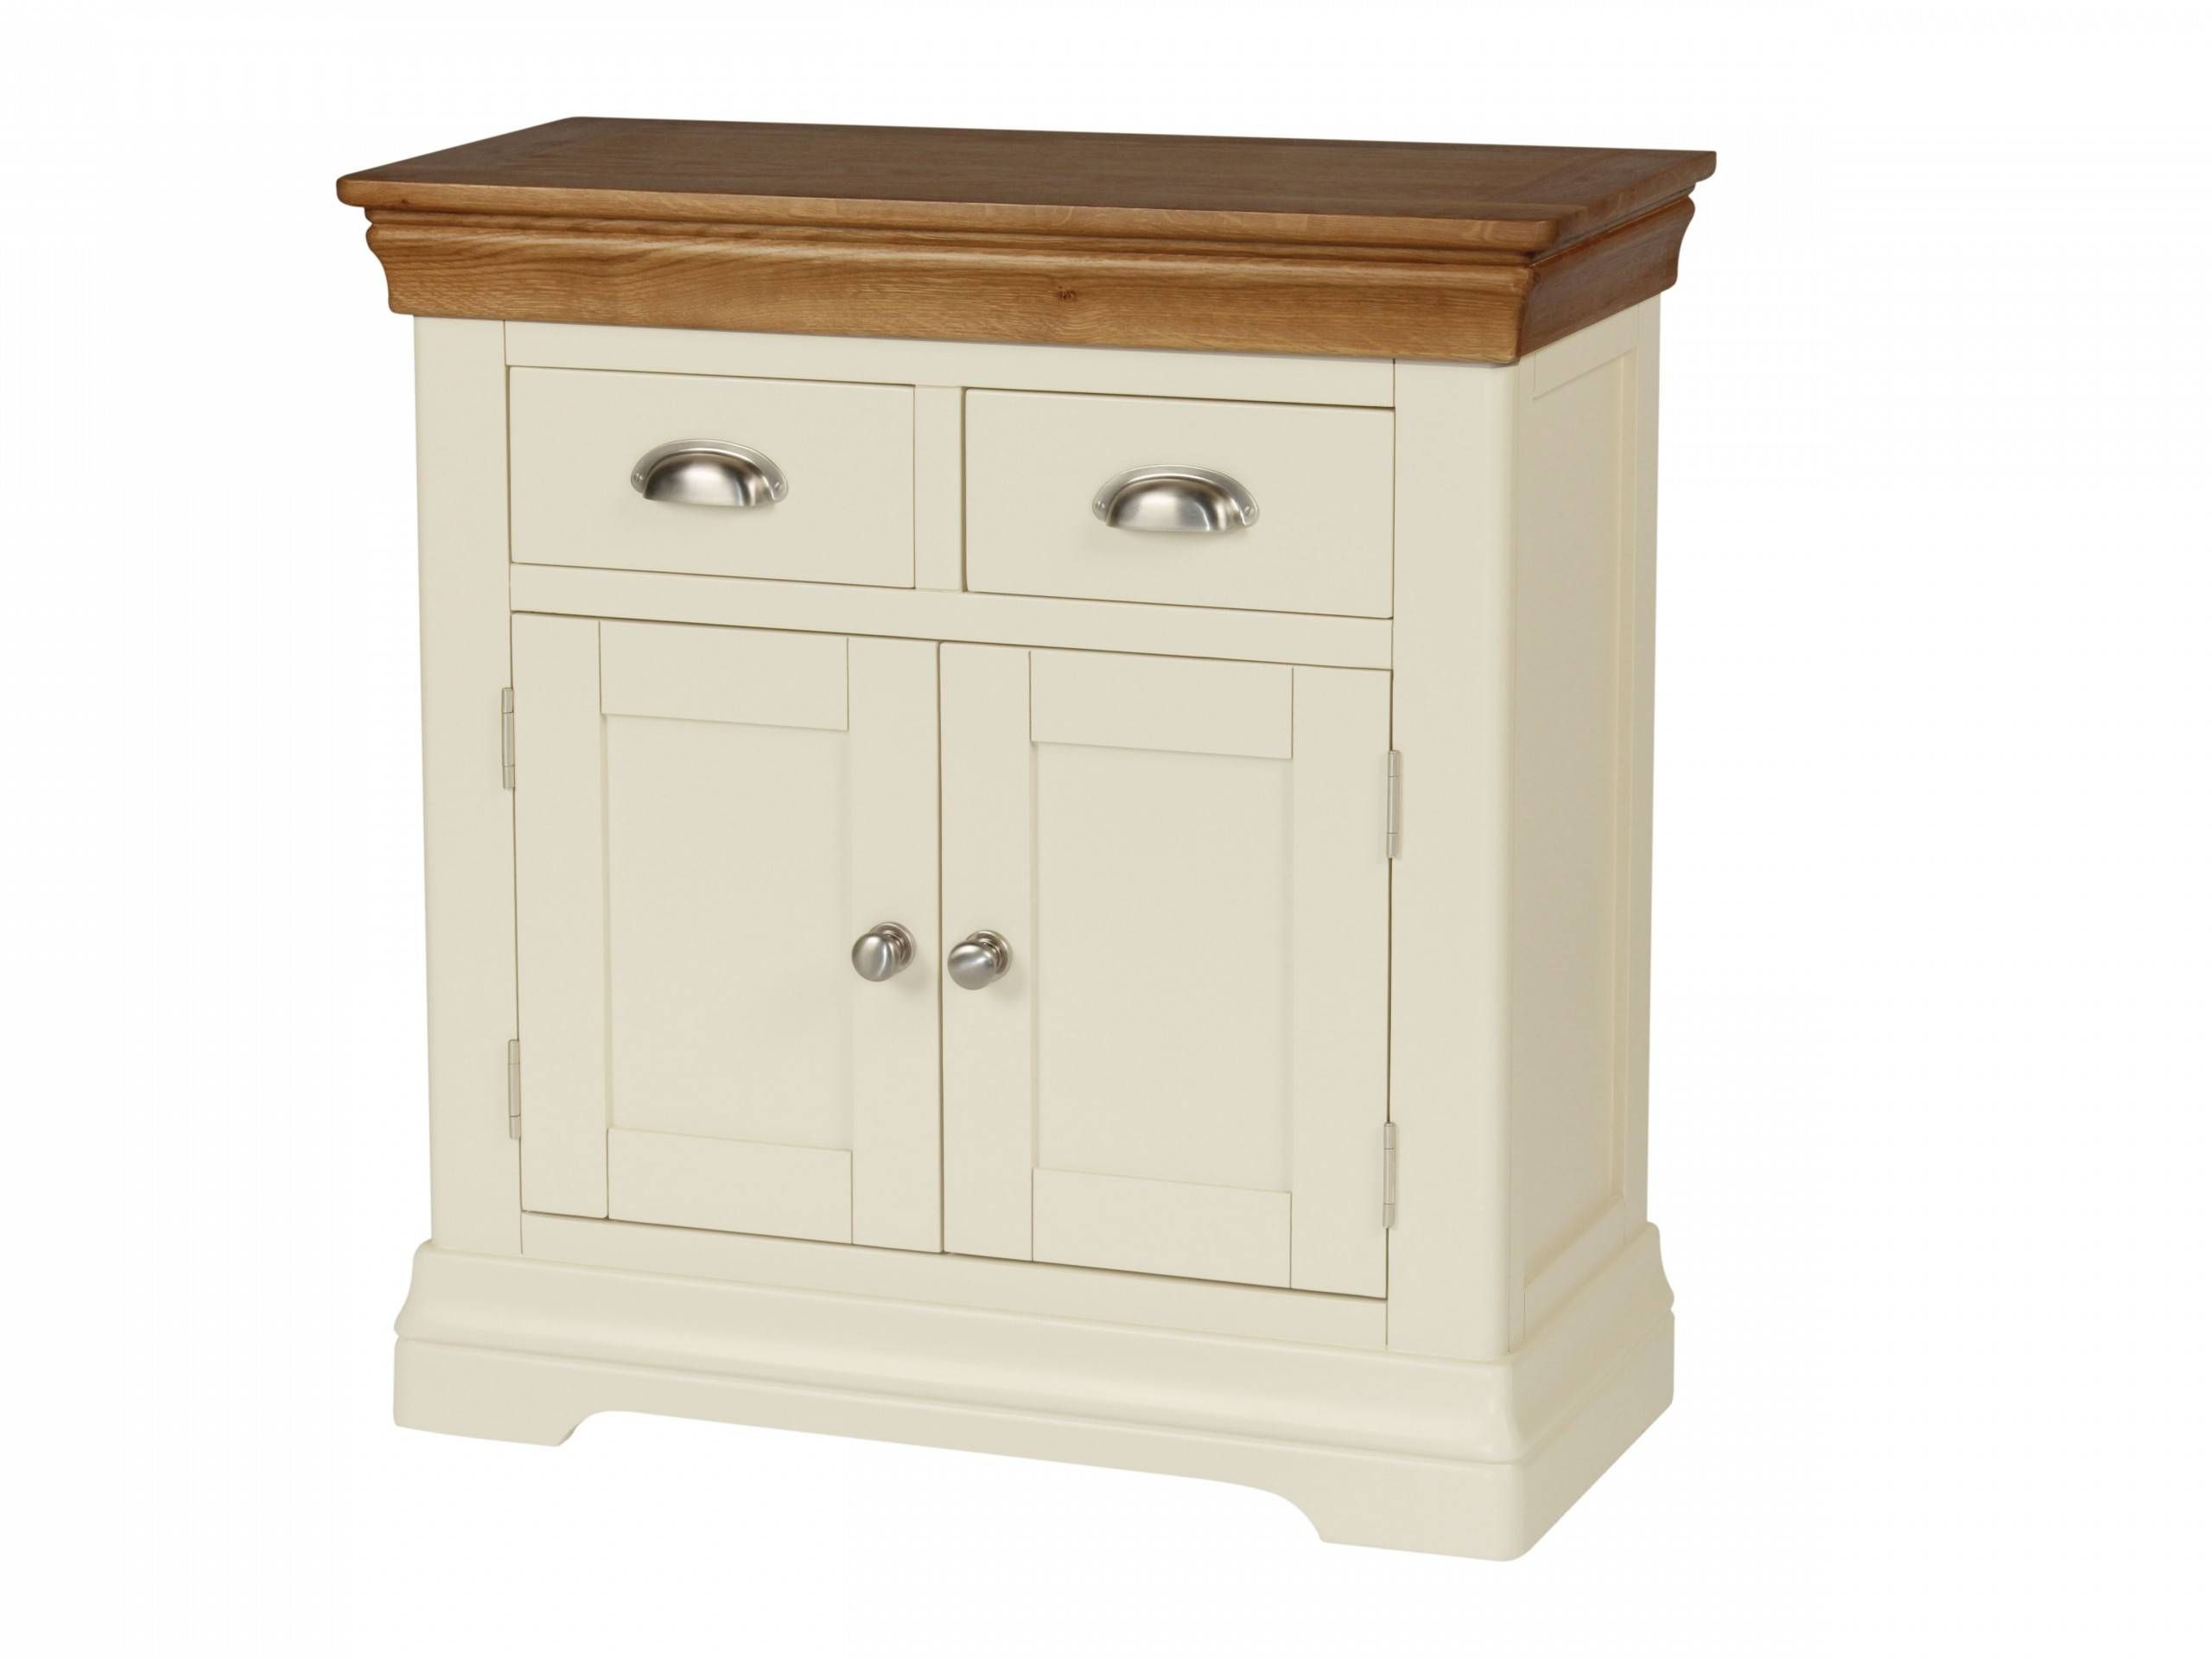 Country Oak Farmhouse 80cm Cream Painted Sideboard With Regard To Cream Sideboards (View 11 of 15)